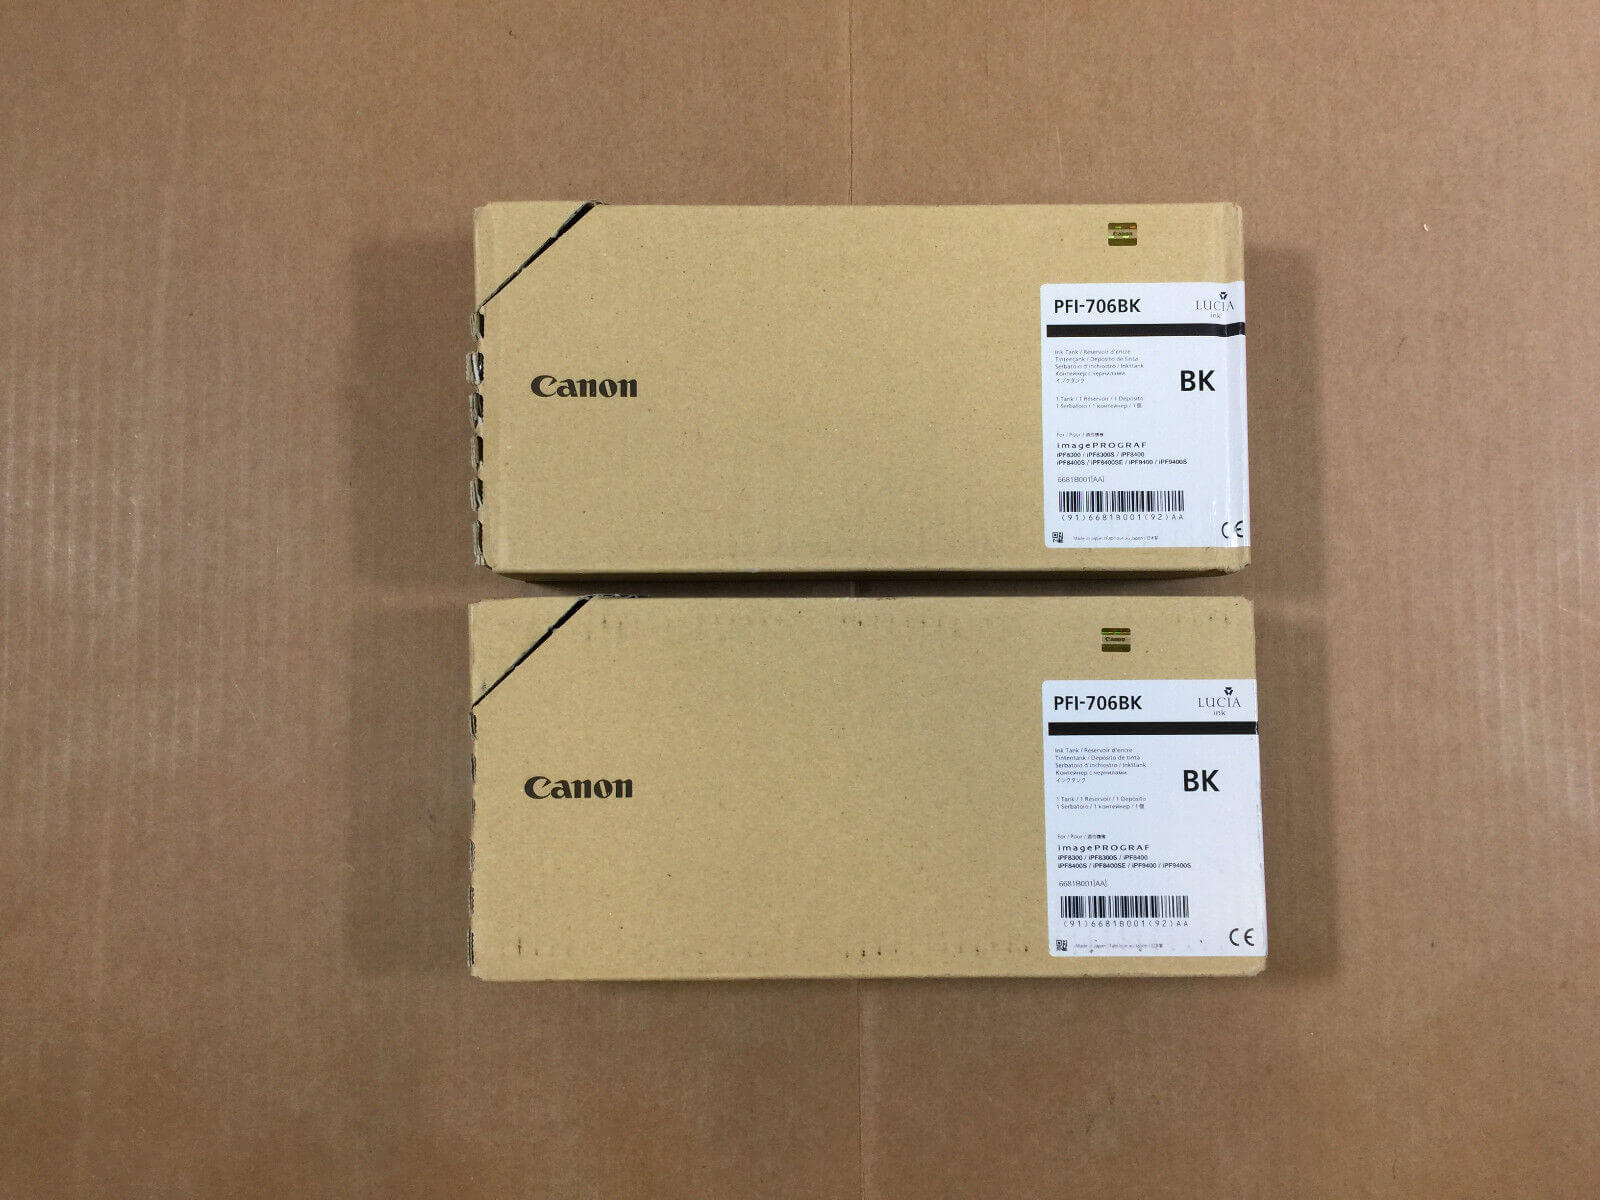 2 EXPIRED Canon PFI-706 BK ink cartridges imagePROGRAF 8400 8300 9400 FedEx 2Day - copier-clearance-center